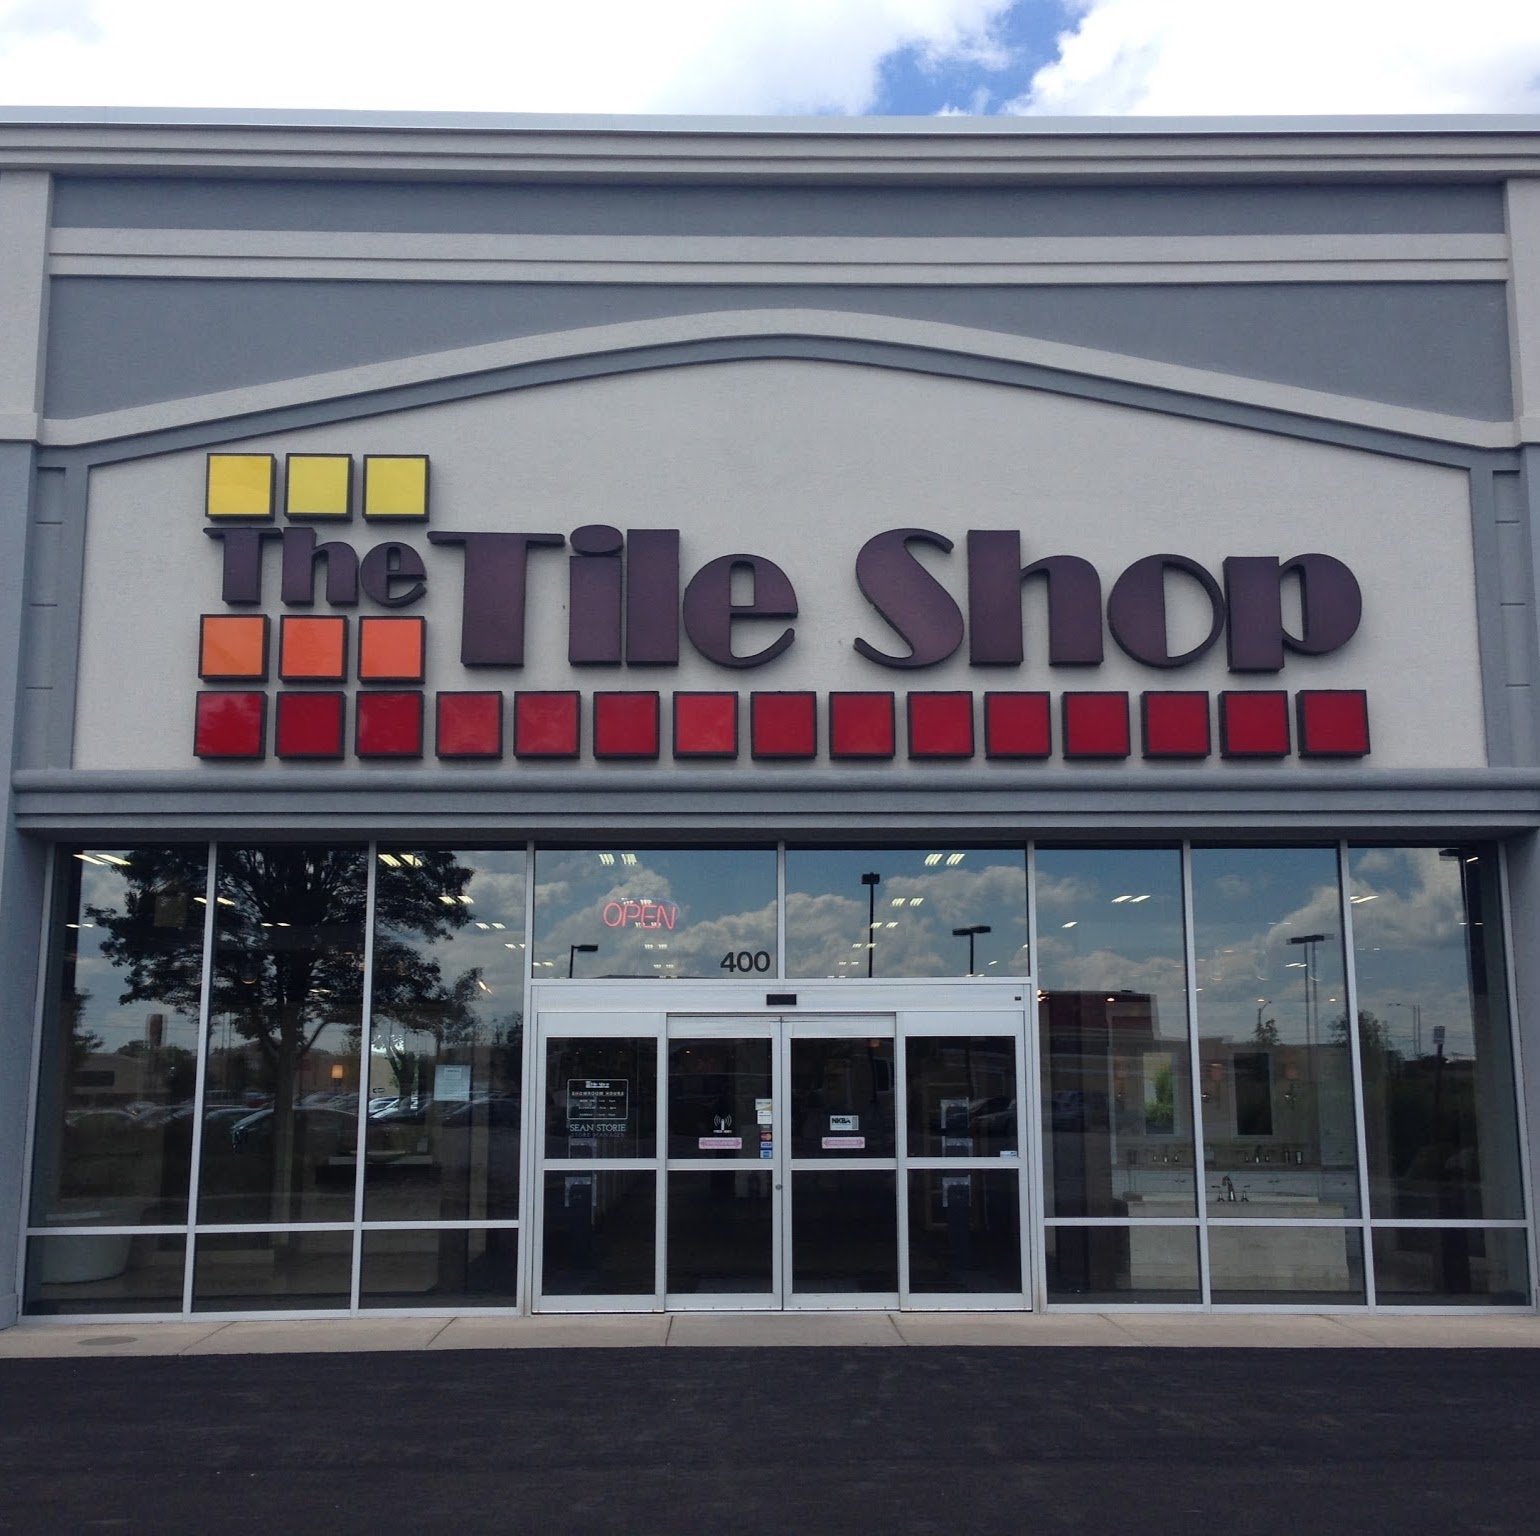 The Tile Shop 400 Jefferson Rd, Rochester, NY 14623 - YP.com